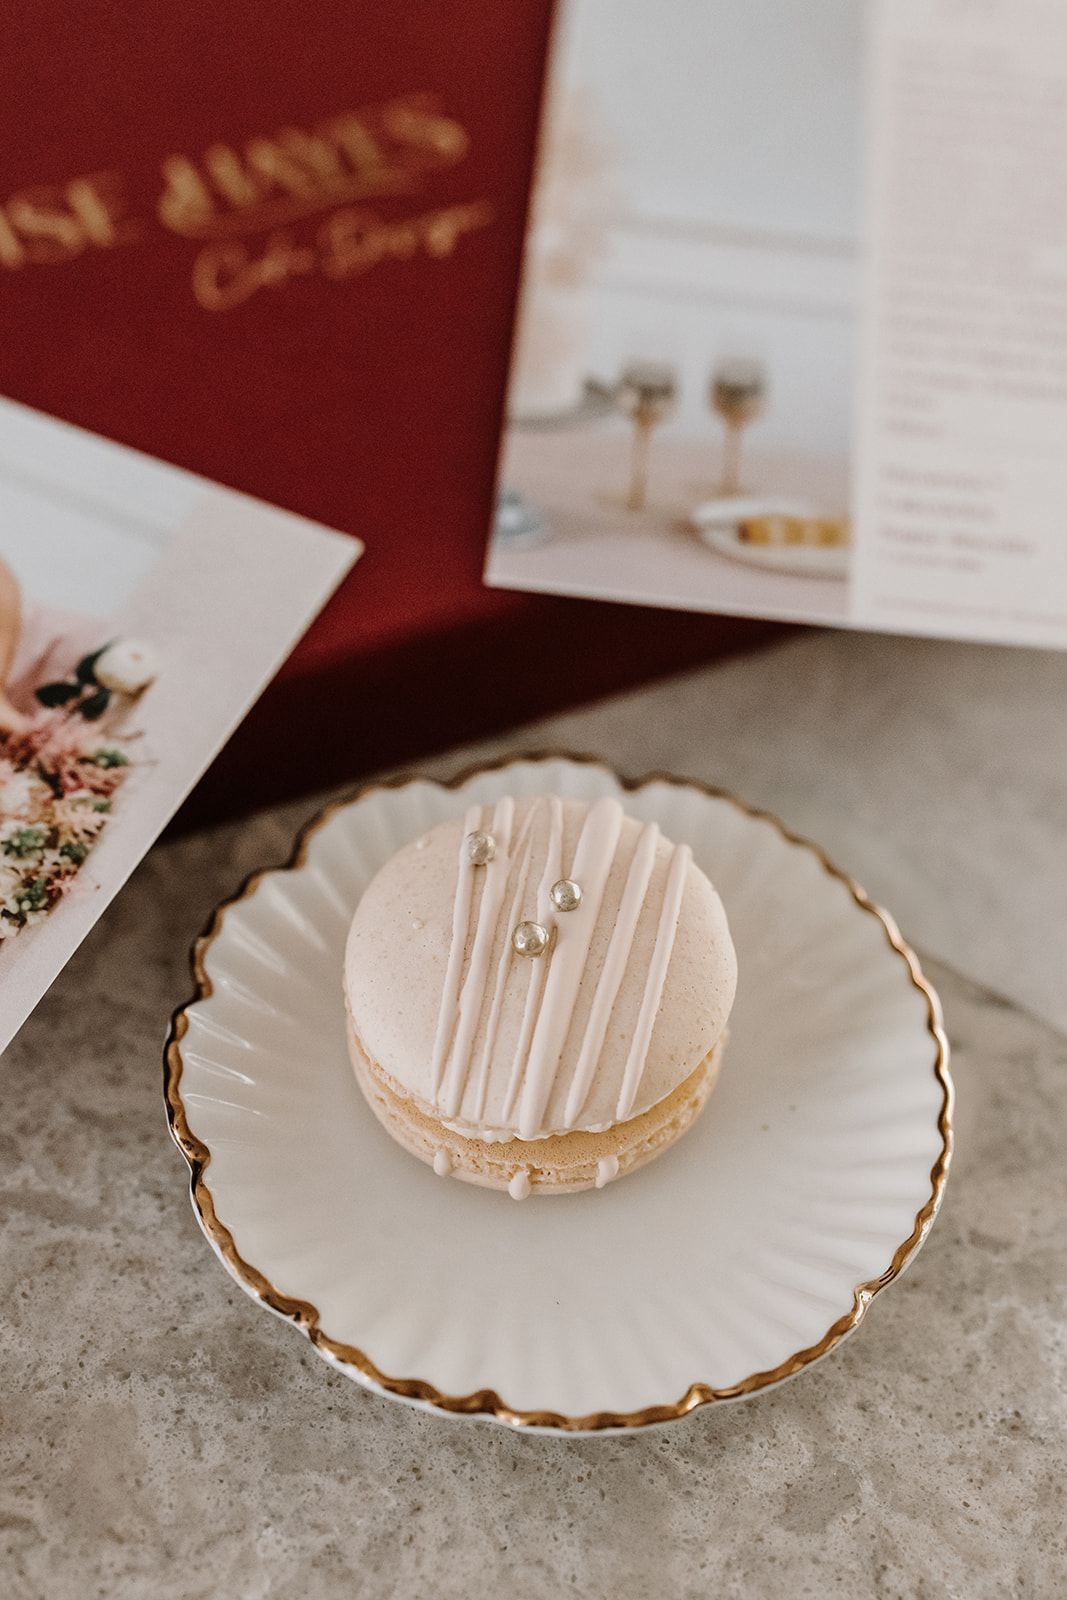 ouise Hayes Cake Design | Contemporary Wedding Cakes | Luxury Wedding Cakes Hampshire, Berkshire, Surrey, Oxfordshire, Cotswolds, London